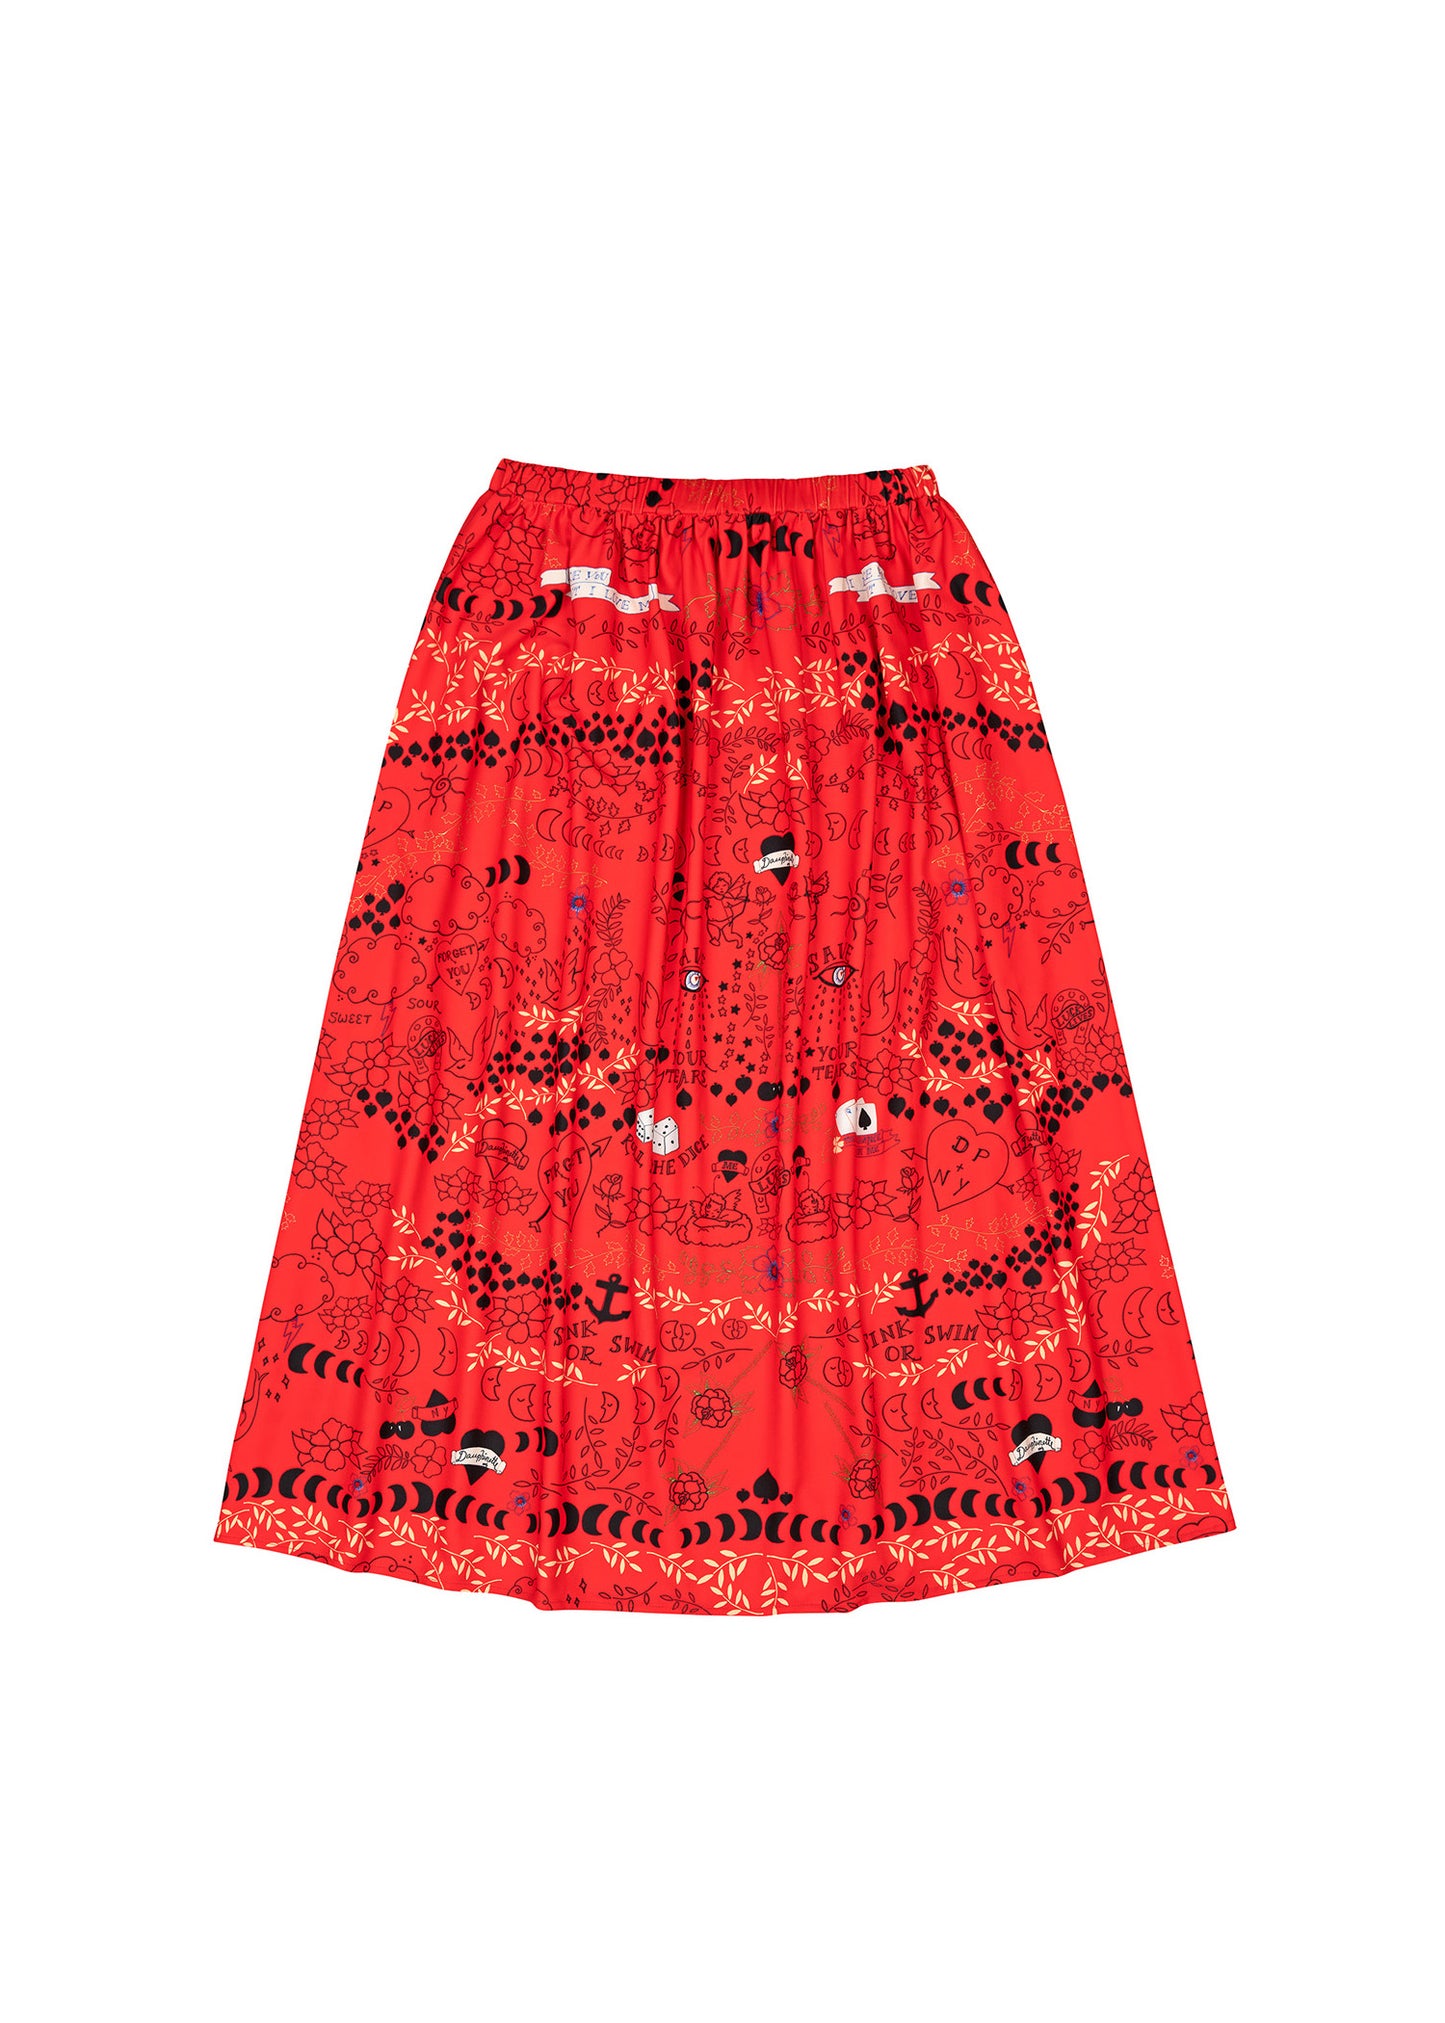 Midi length pull on skirt in our Flame Tattoo You print